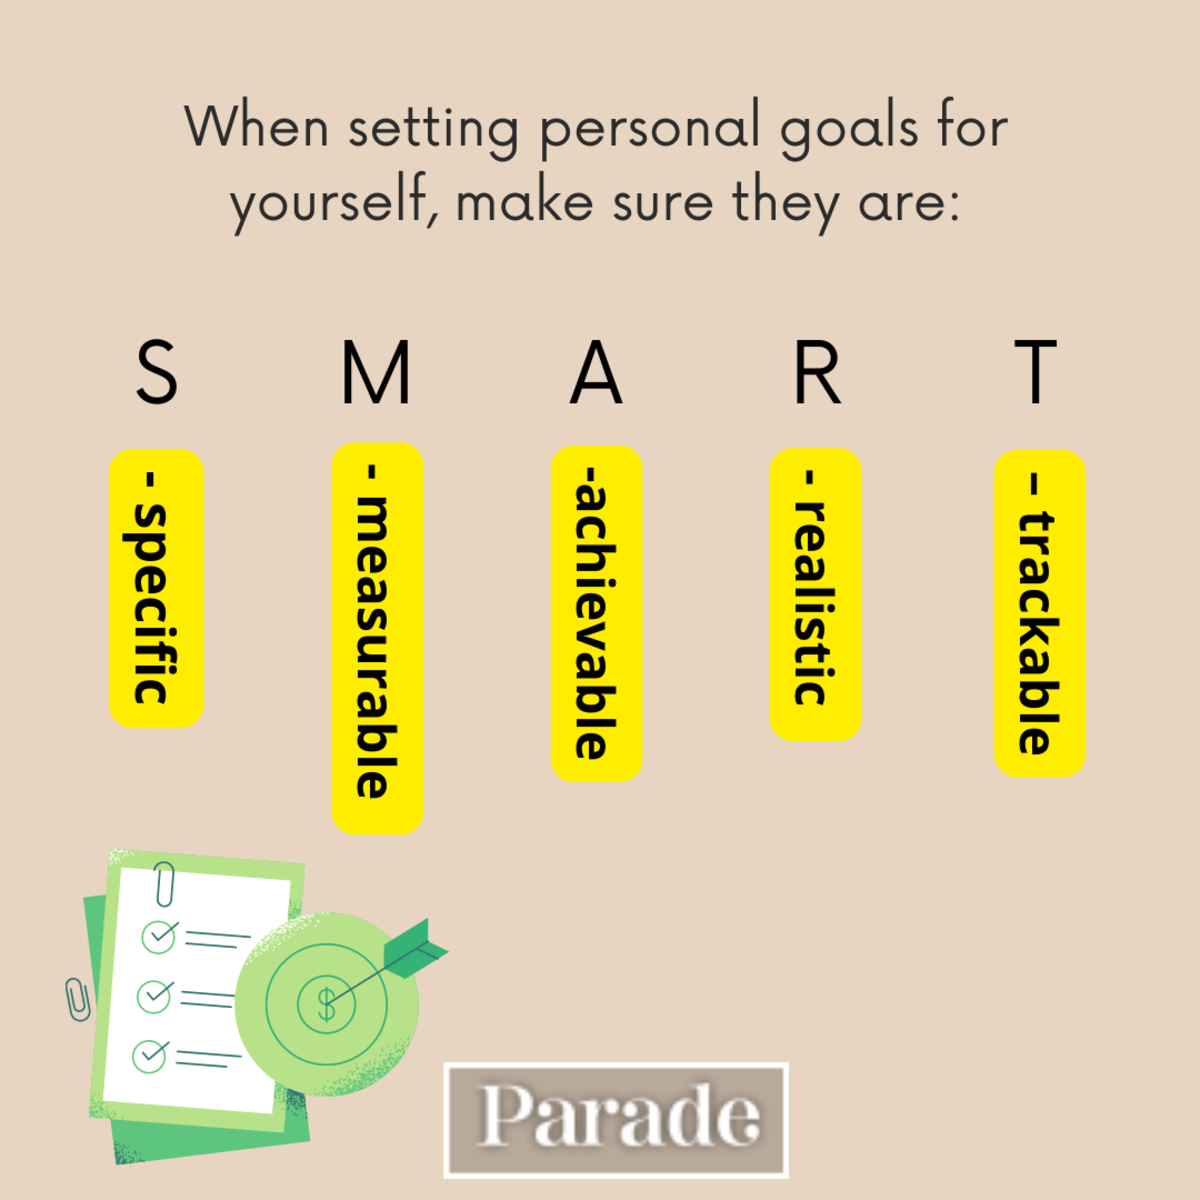 How to Set and Achieve Personal Goals